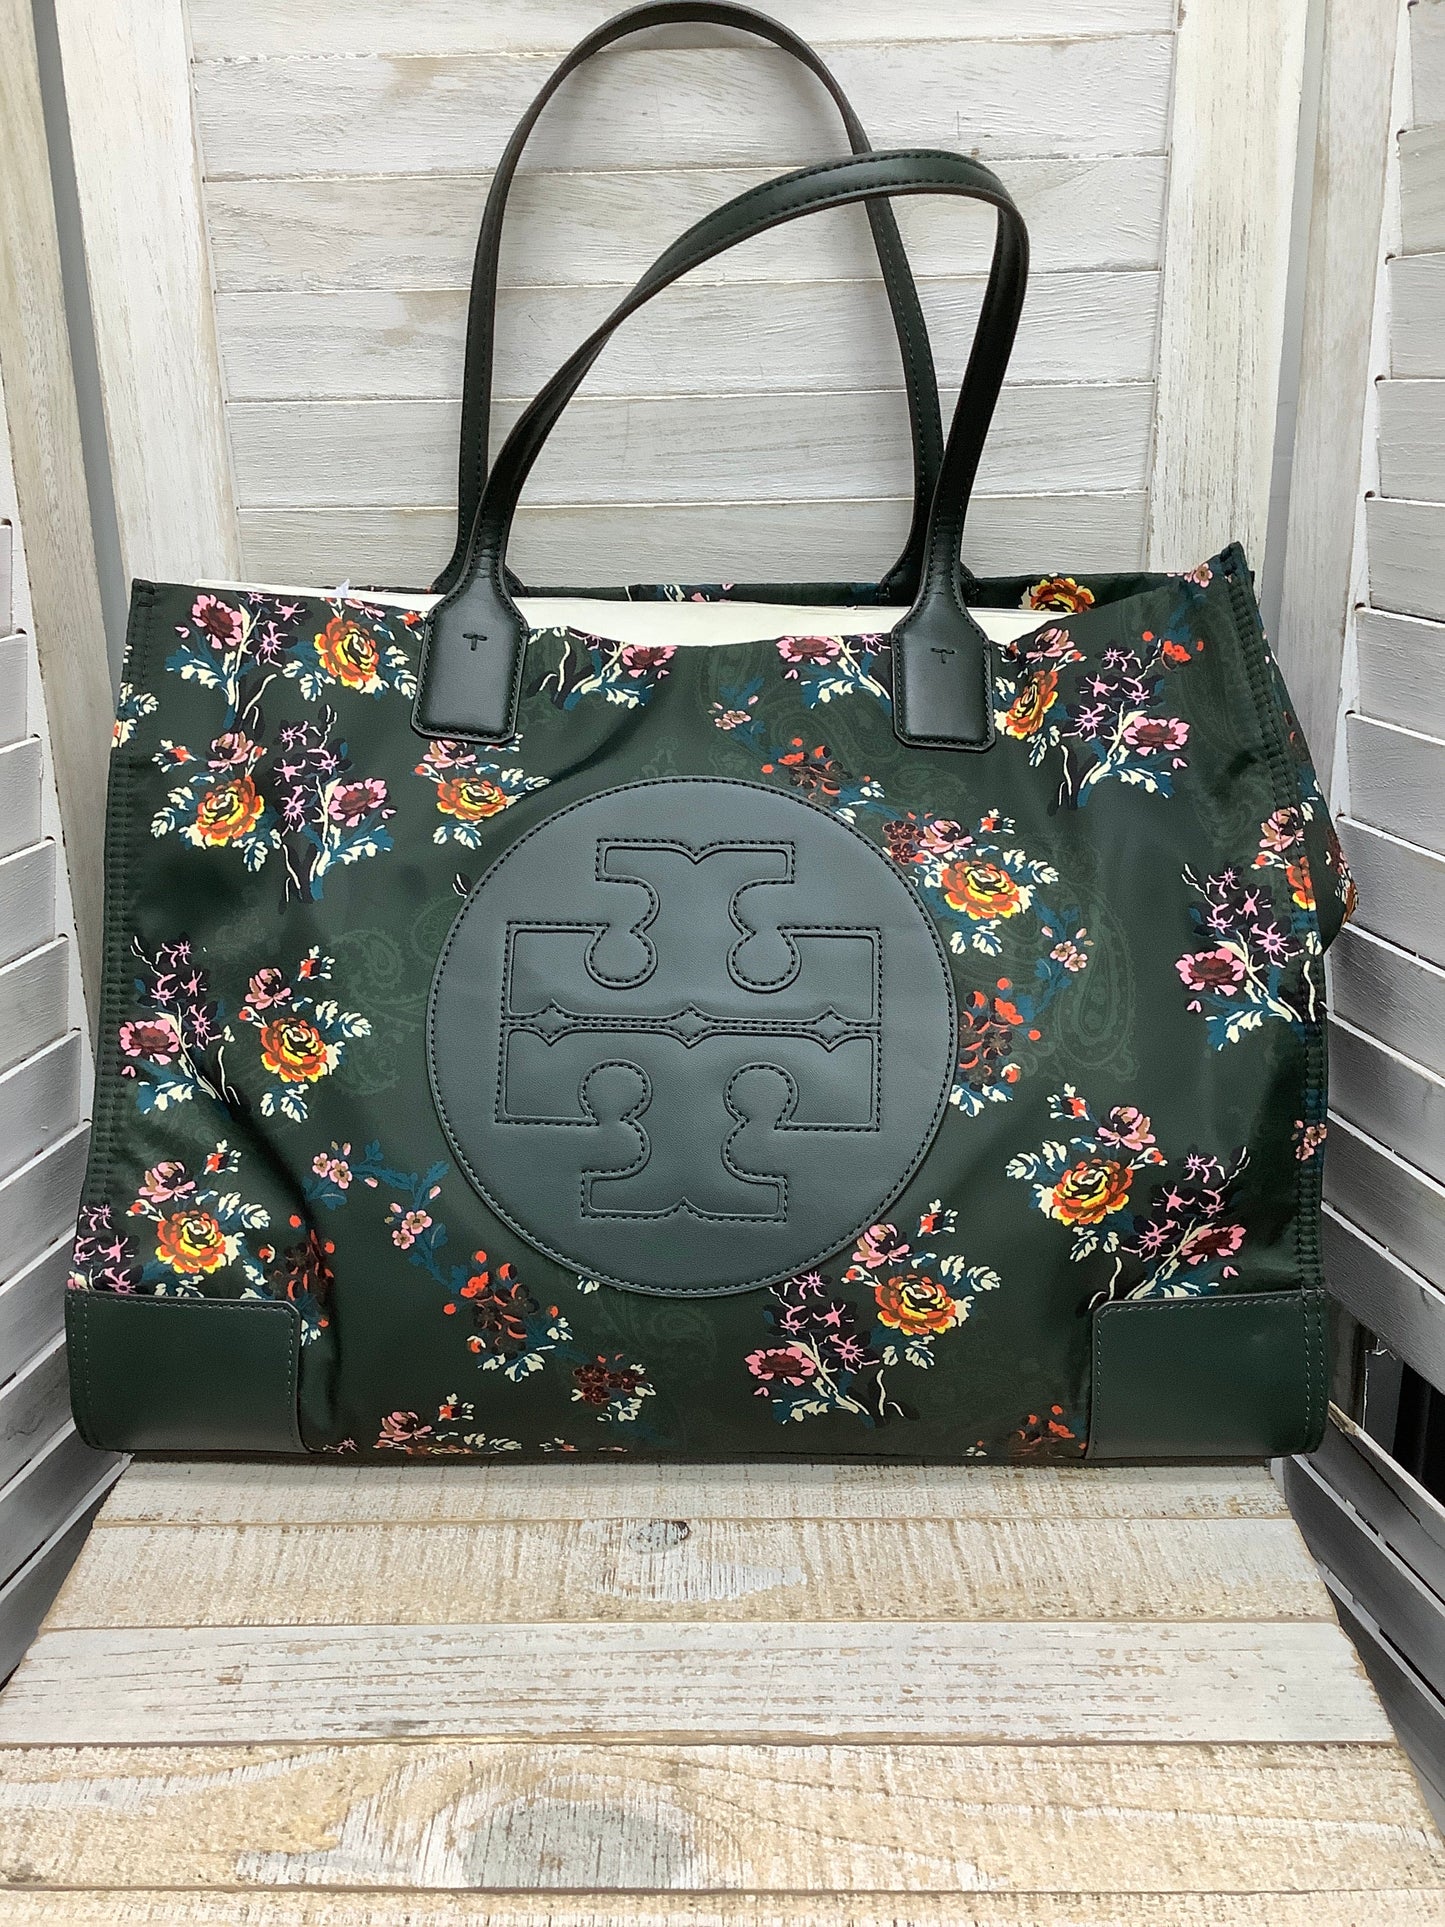 Tote Designer Tory Burch, Size Large